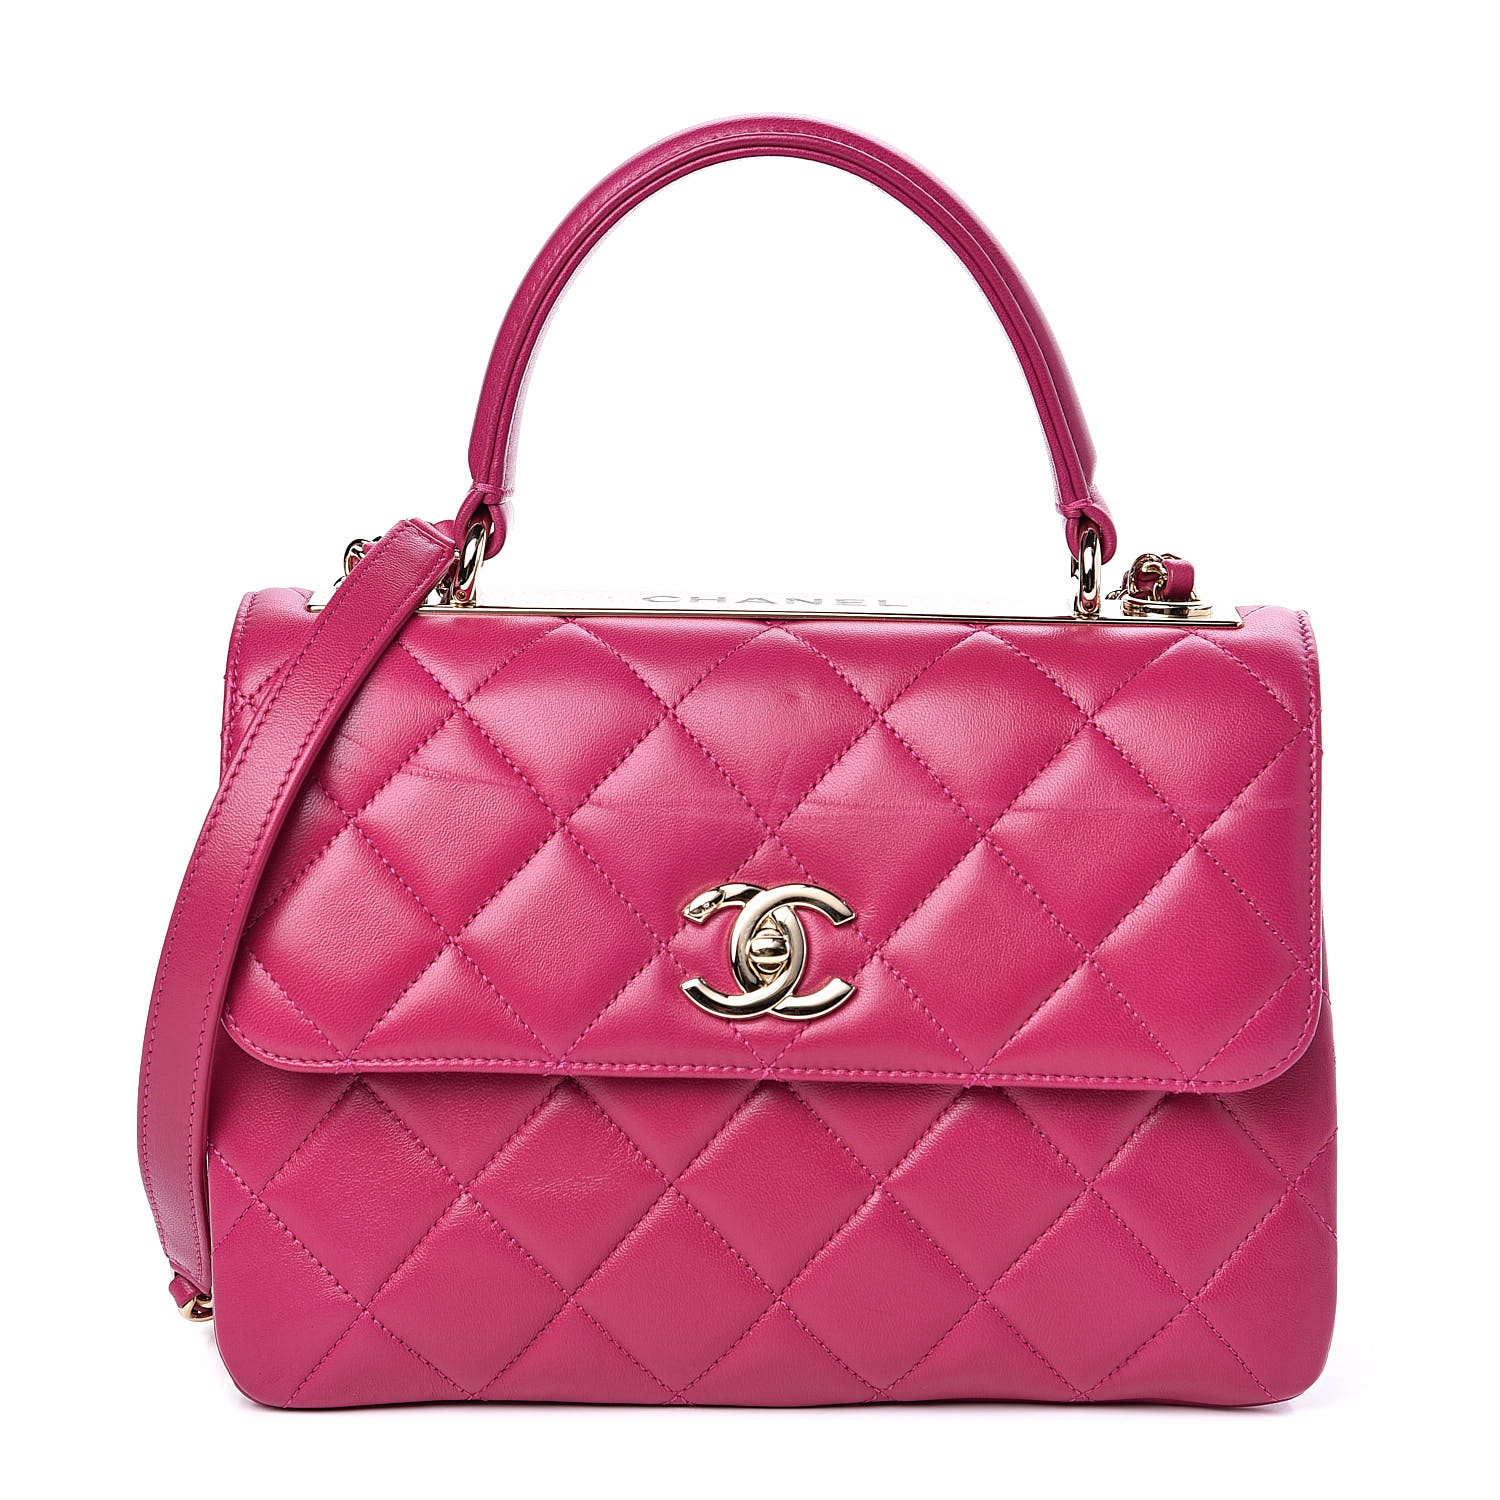 Chanel Classic Pink 2.55 Quilted Handbag